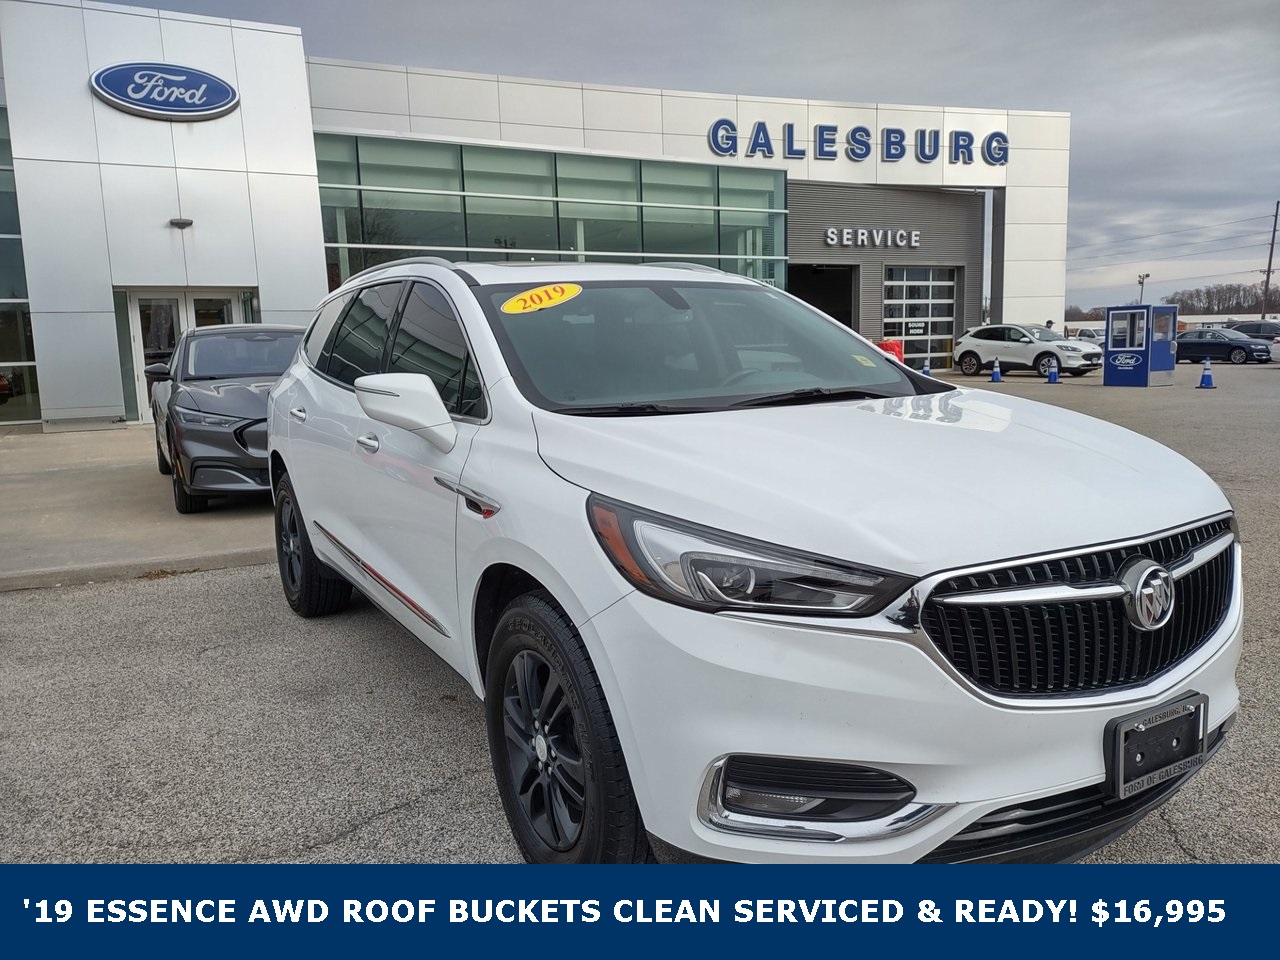 2019 Buick Enclave Galesburg IL